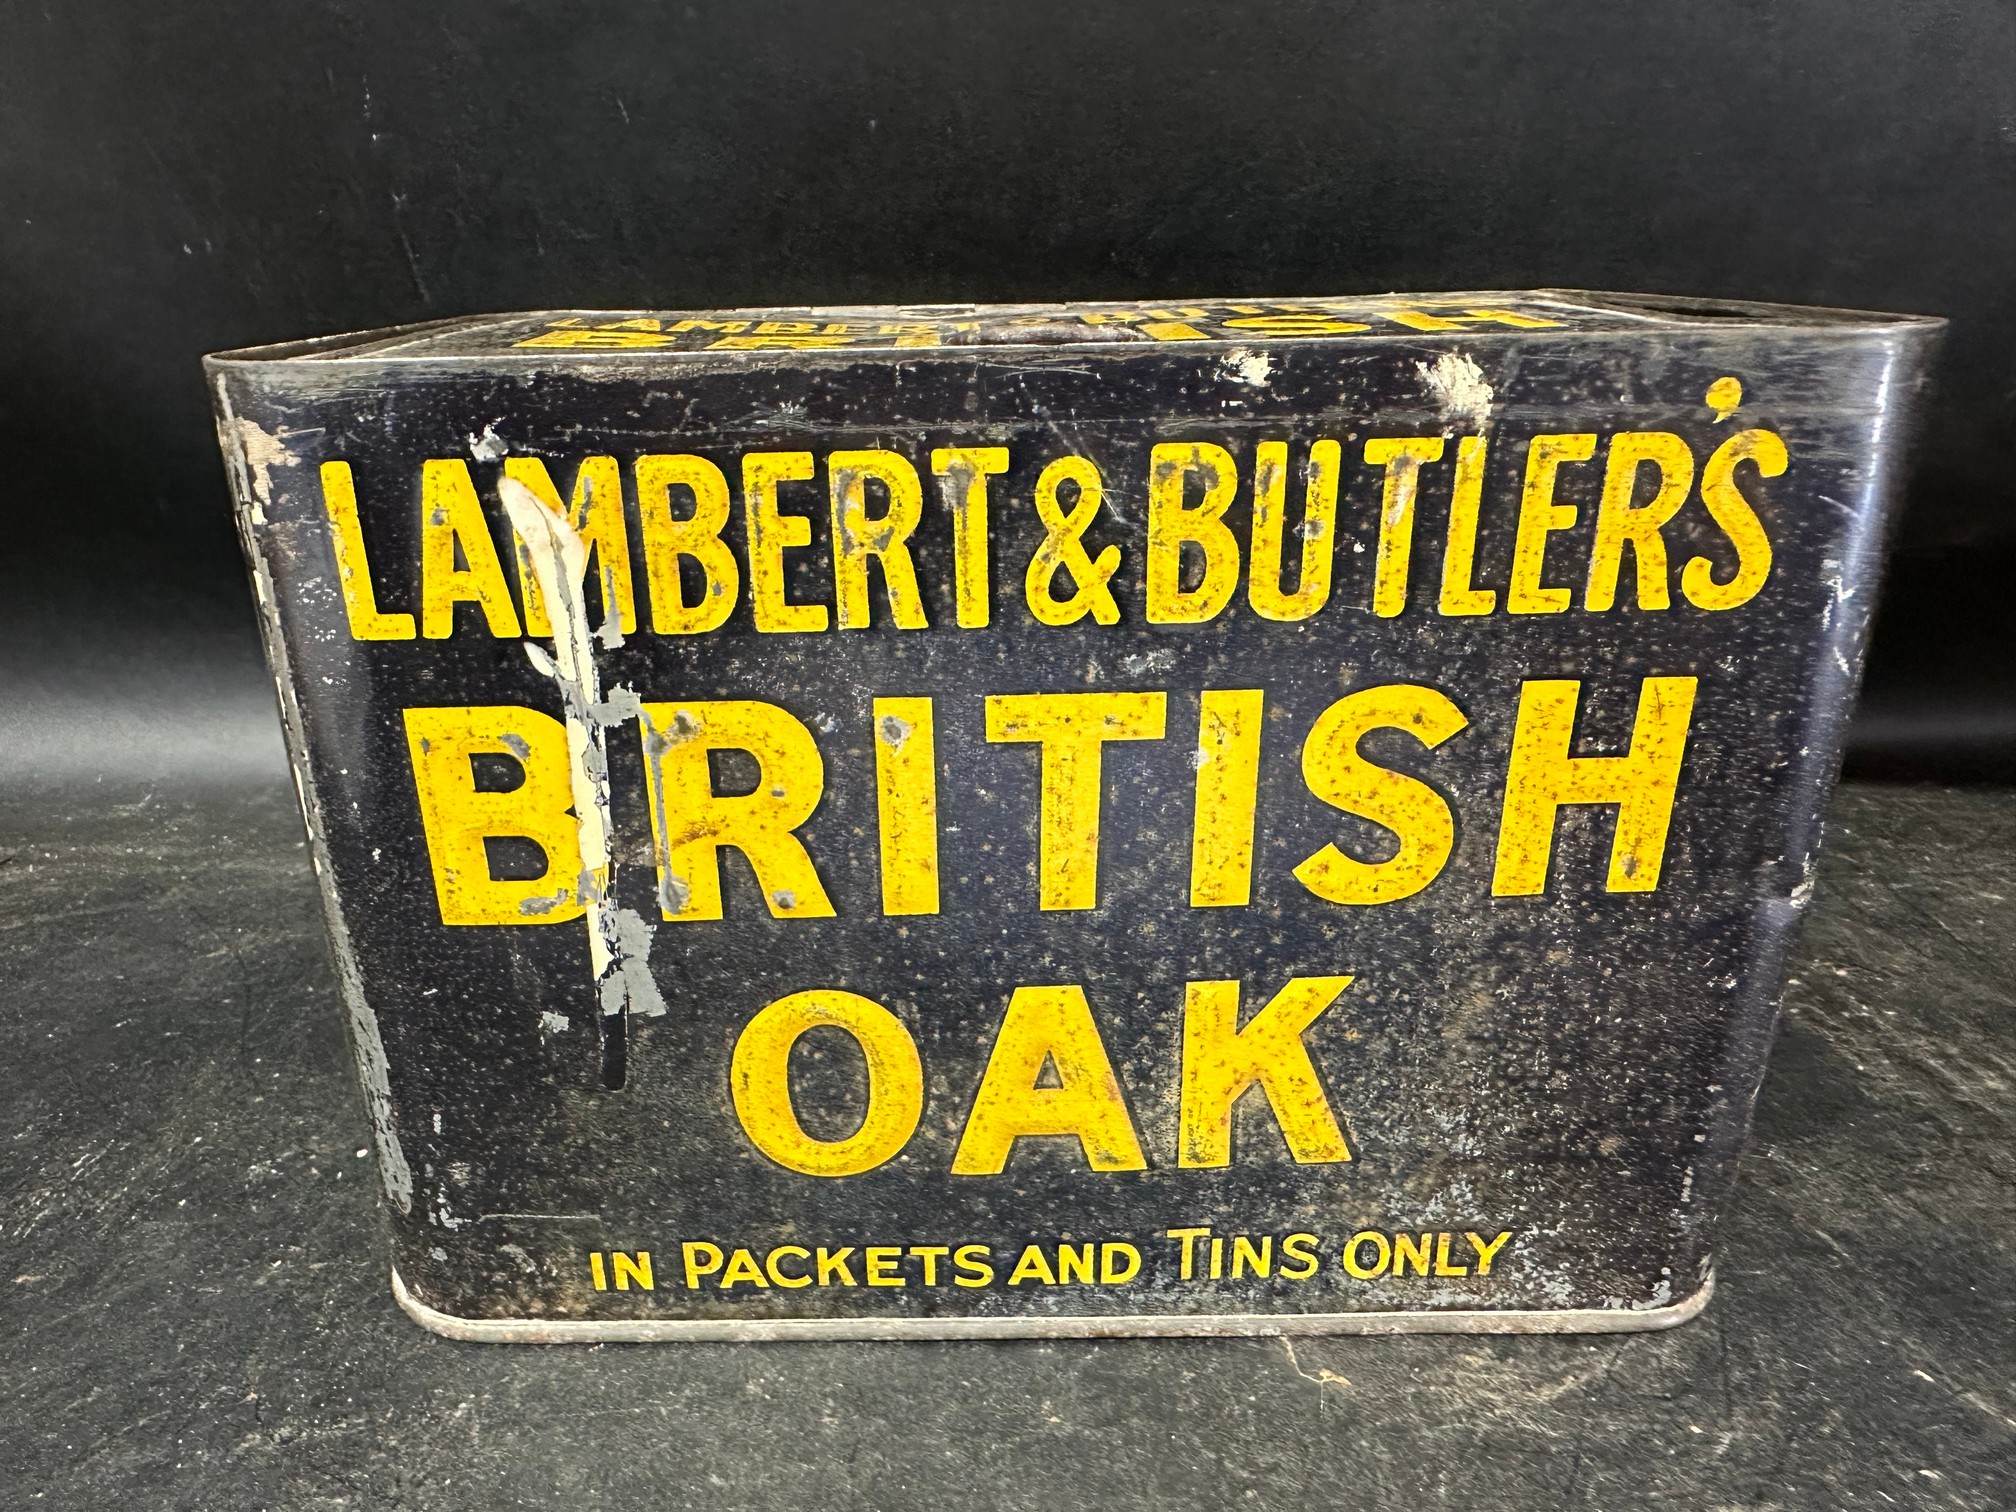 A Lambert & Butler's British Oak in packets and tins only counter box for "British Oak Shag", issued - Image 3 of 8